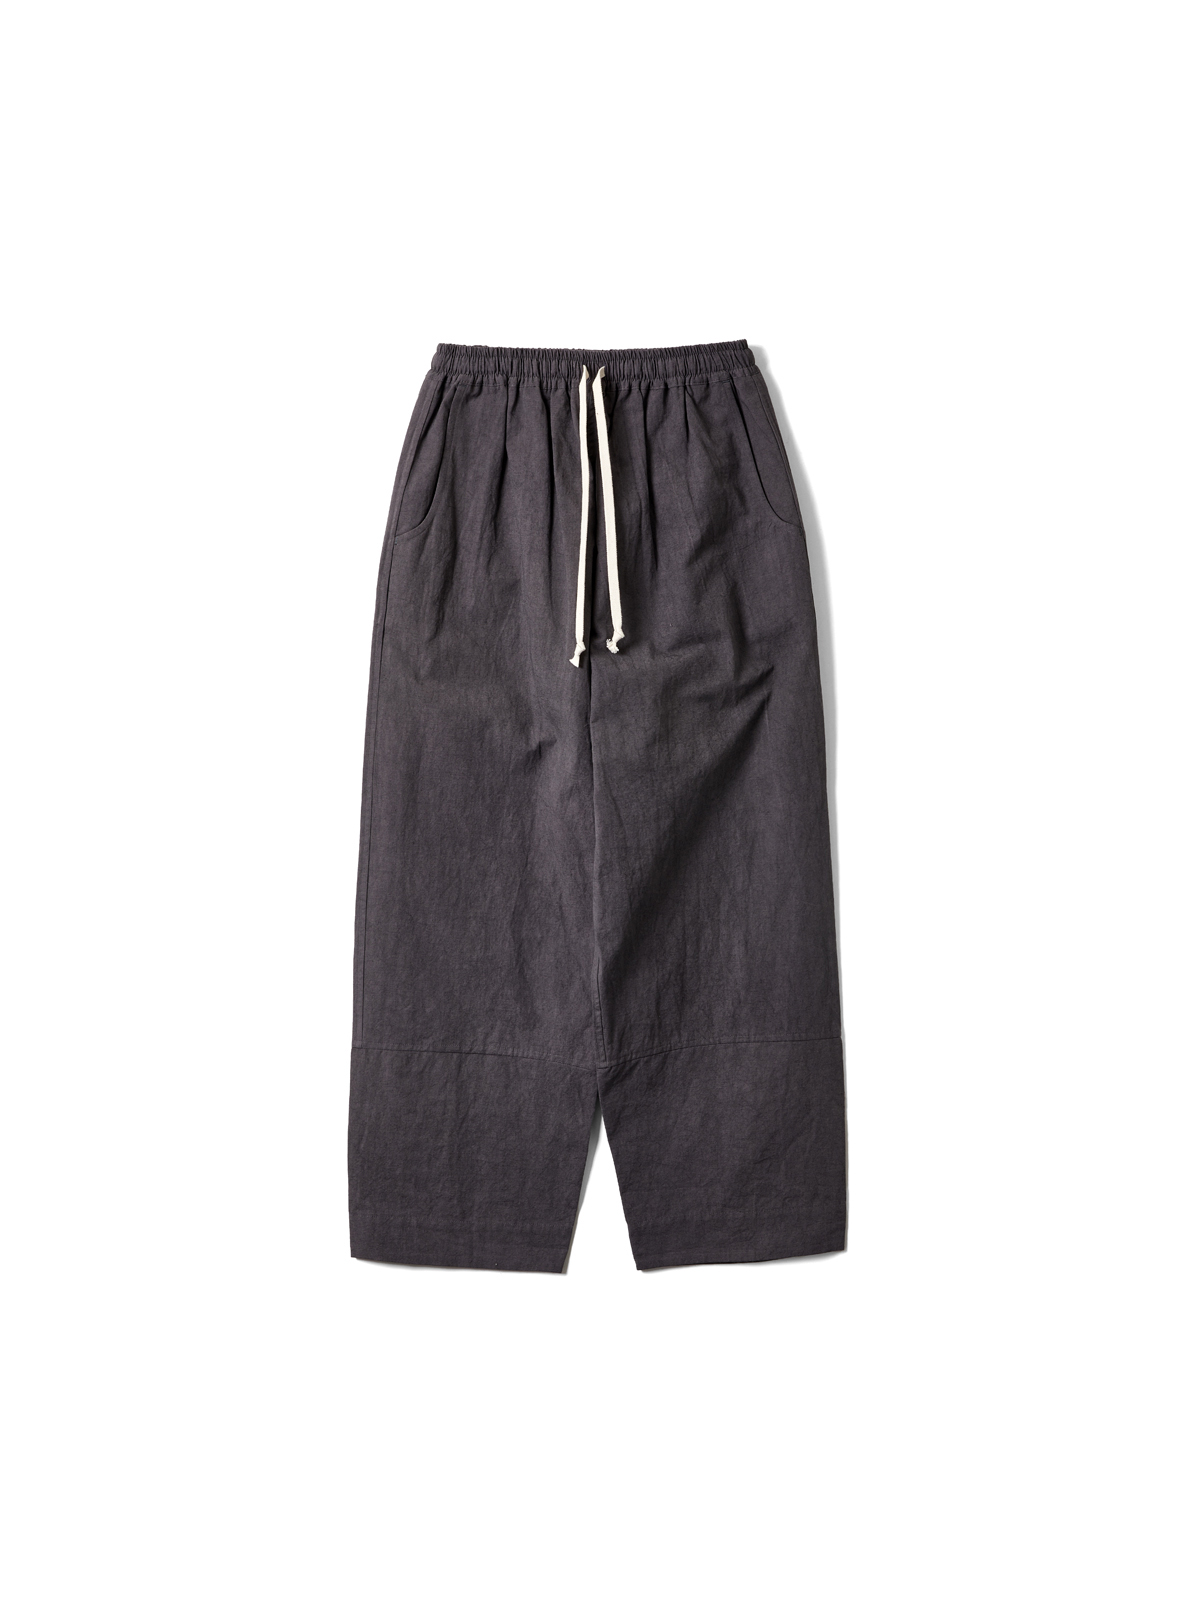 SIMPLE EASY PANTS (ANTHRACITE)